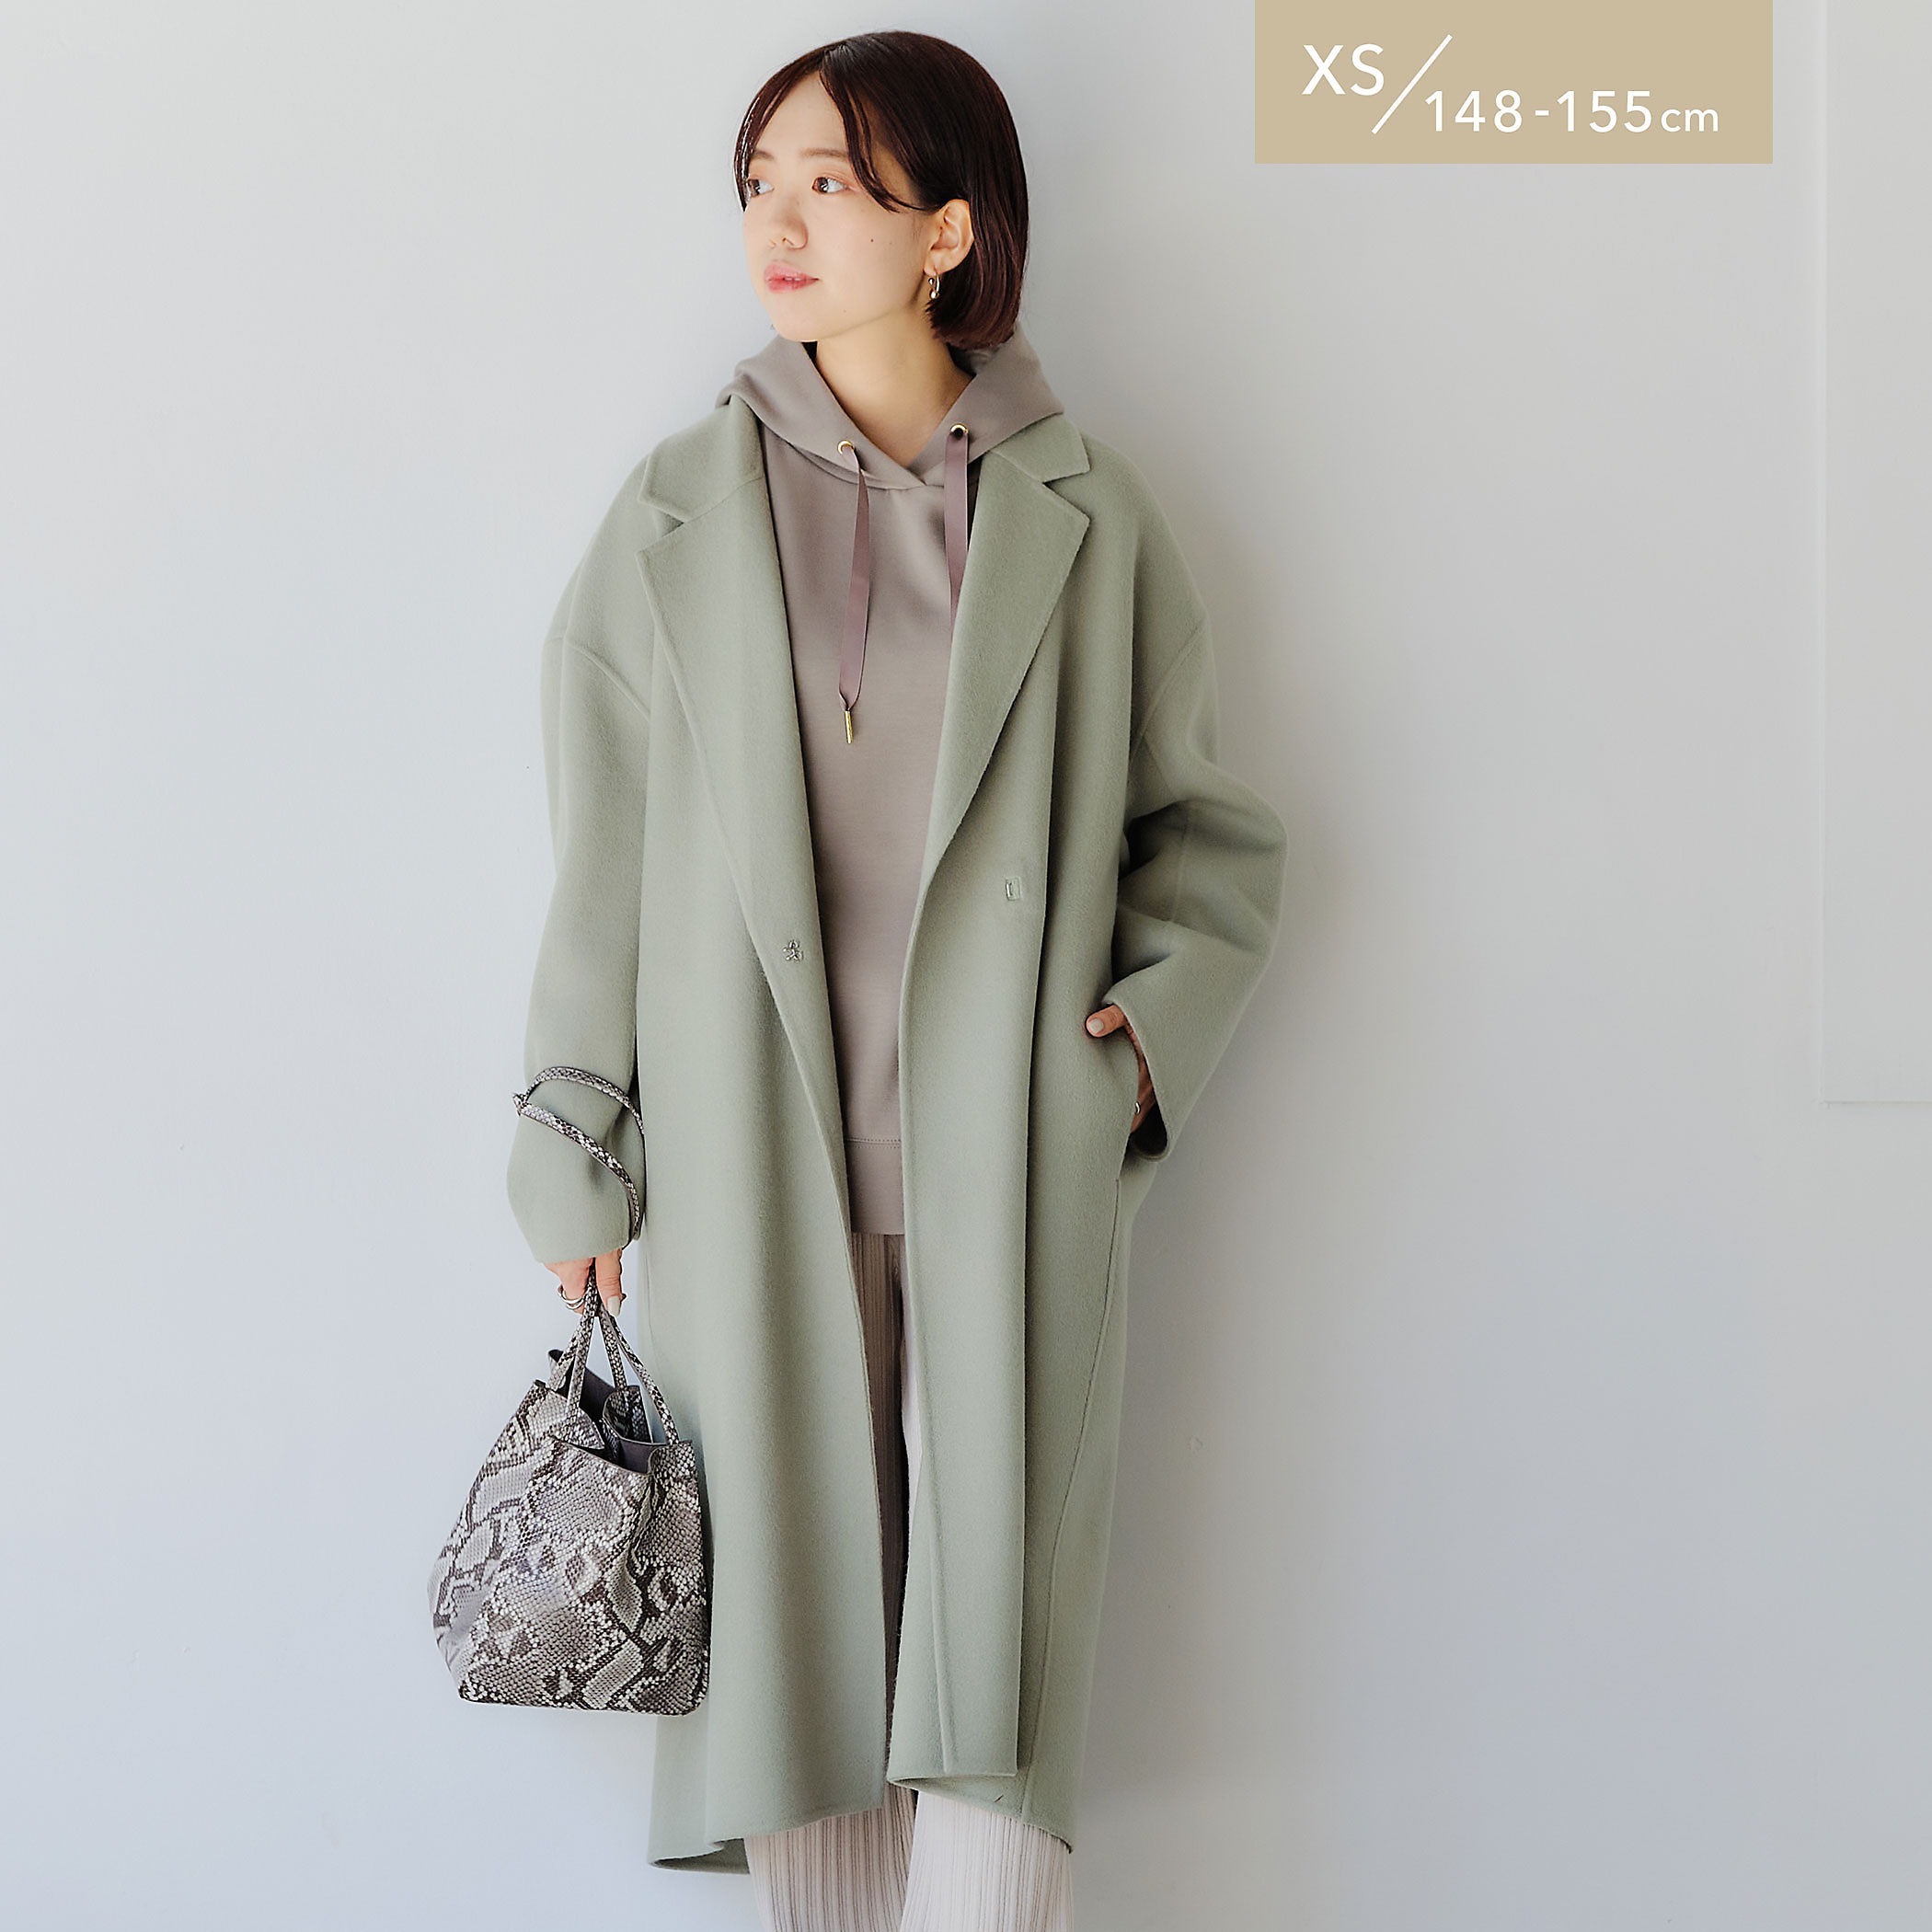 UNITED ARROWS green label relaxing【WEB限定】［XS/H148-155cm］EX FINEW リバー チェスター コート￥29,700